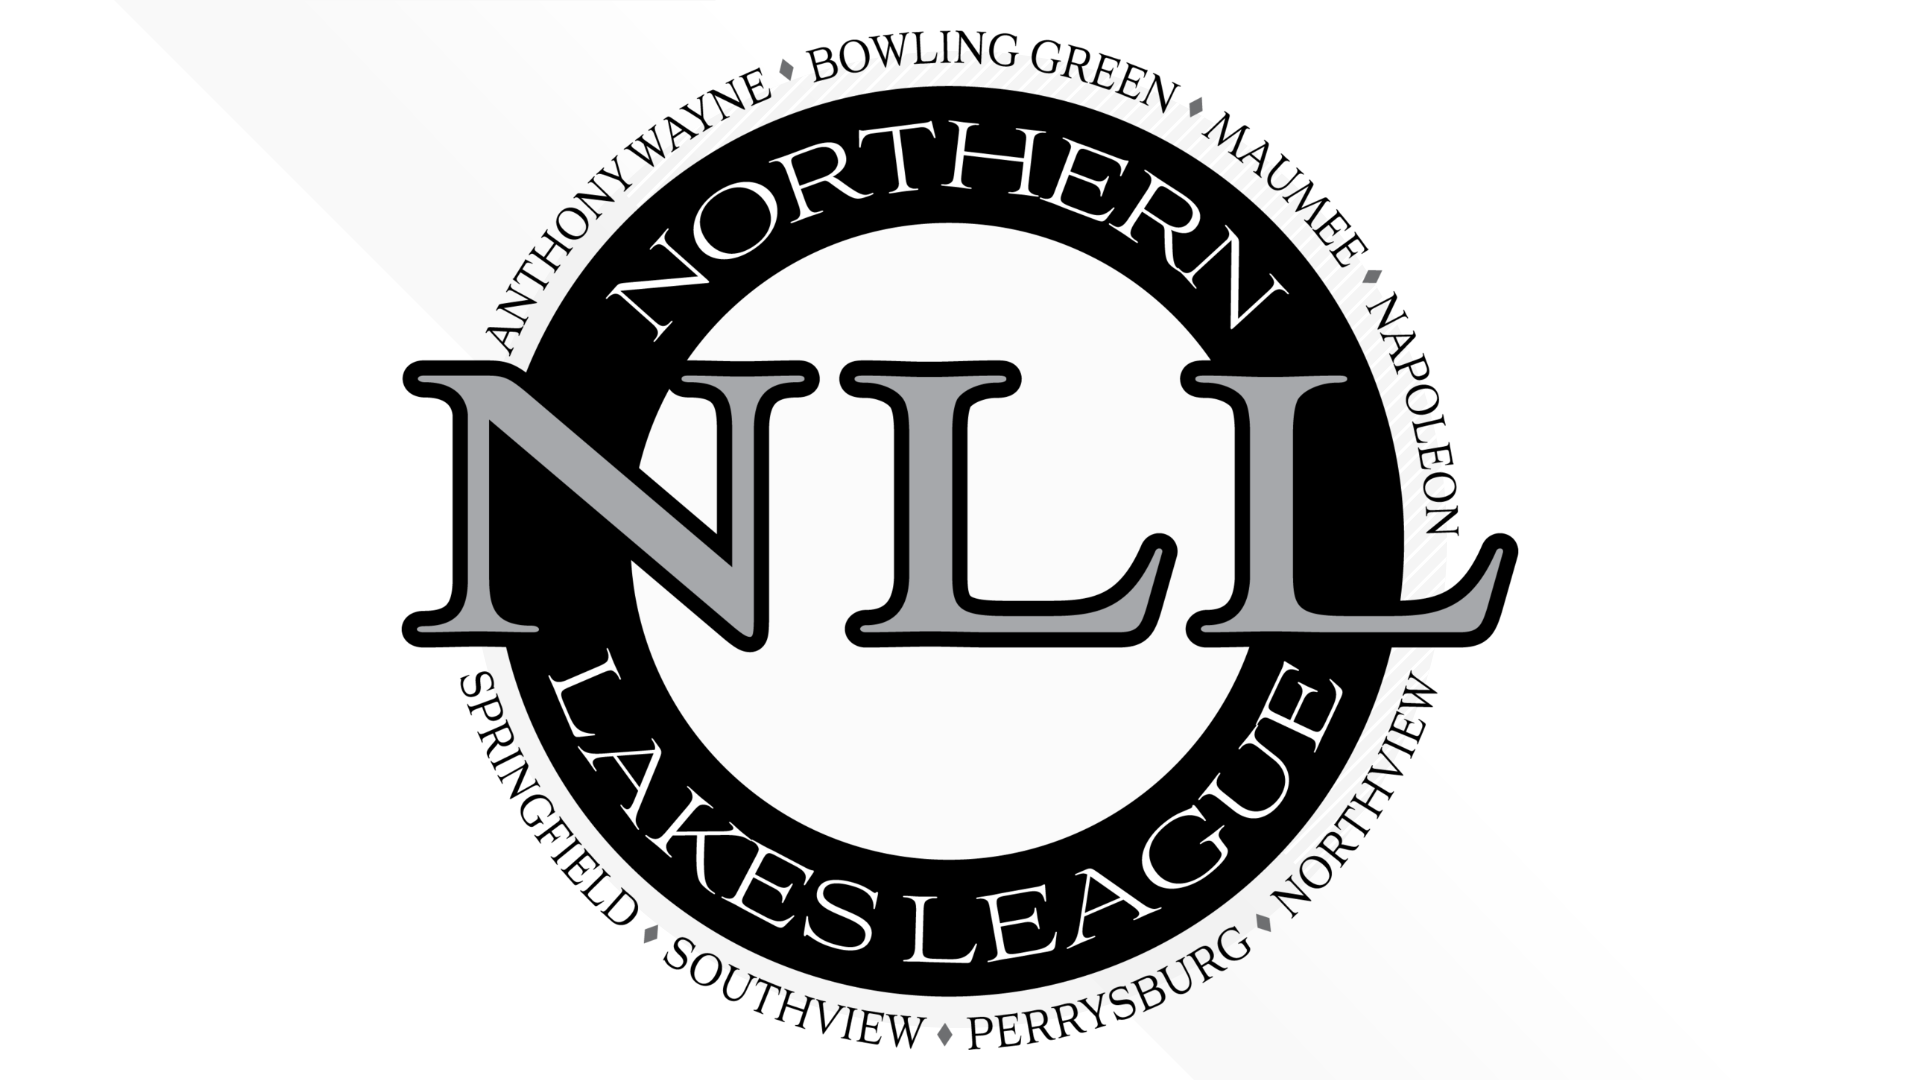 The NLL will move to two divisions and bring in Whitmer, Fremont Ross, Findlay and Clay. They anticipate these schools will join the newly shaped NLL for 2023-24.